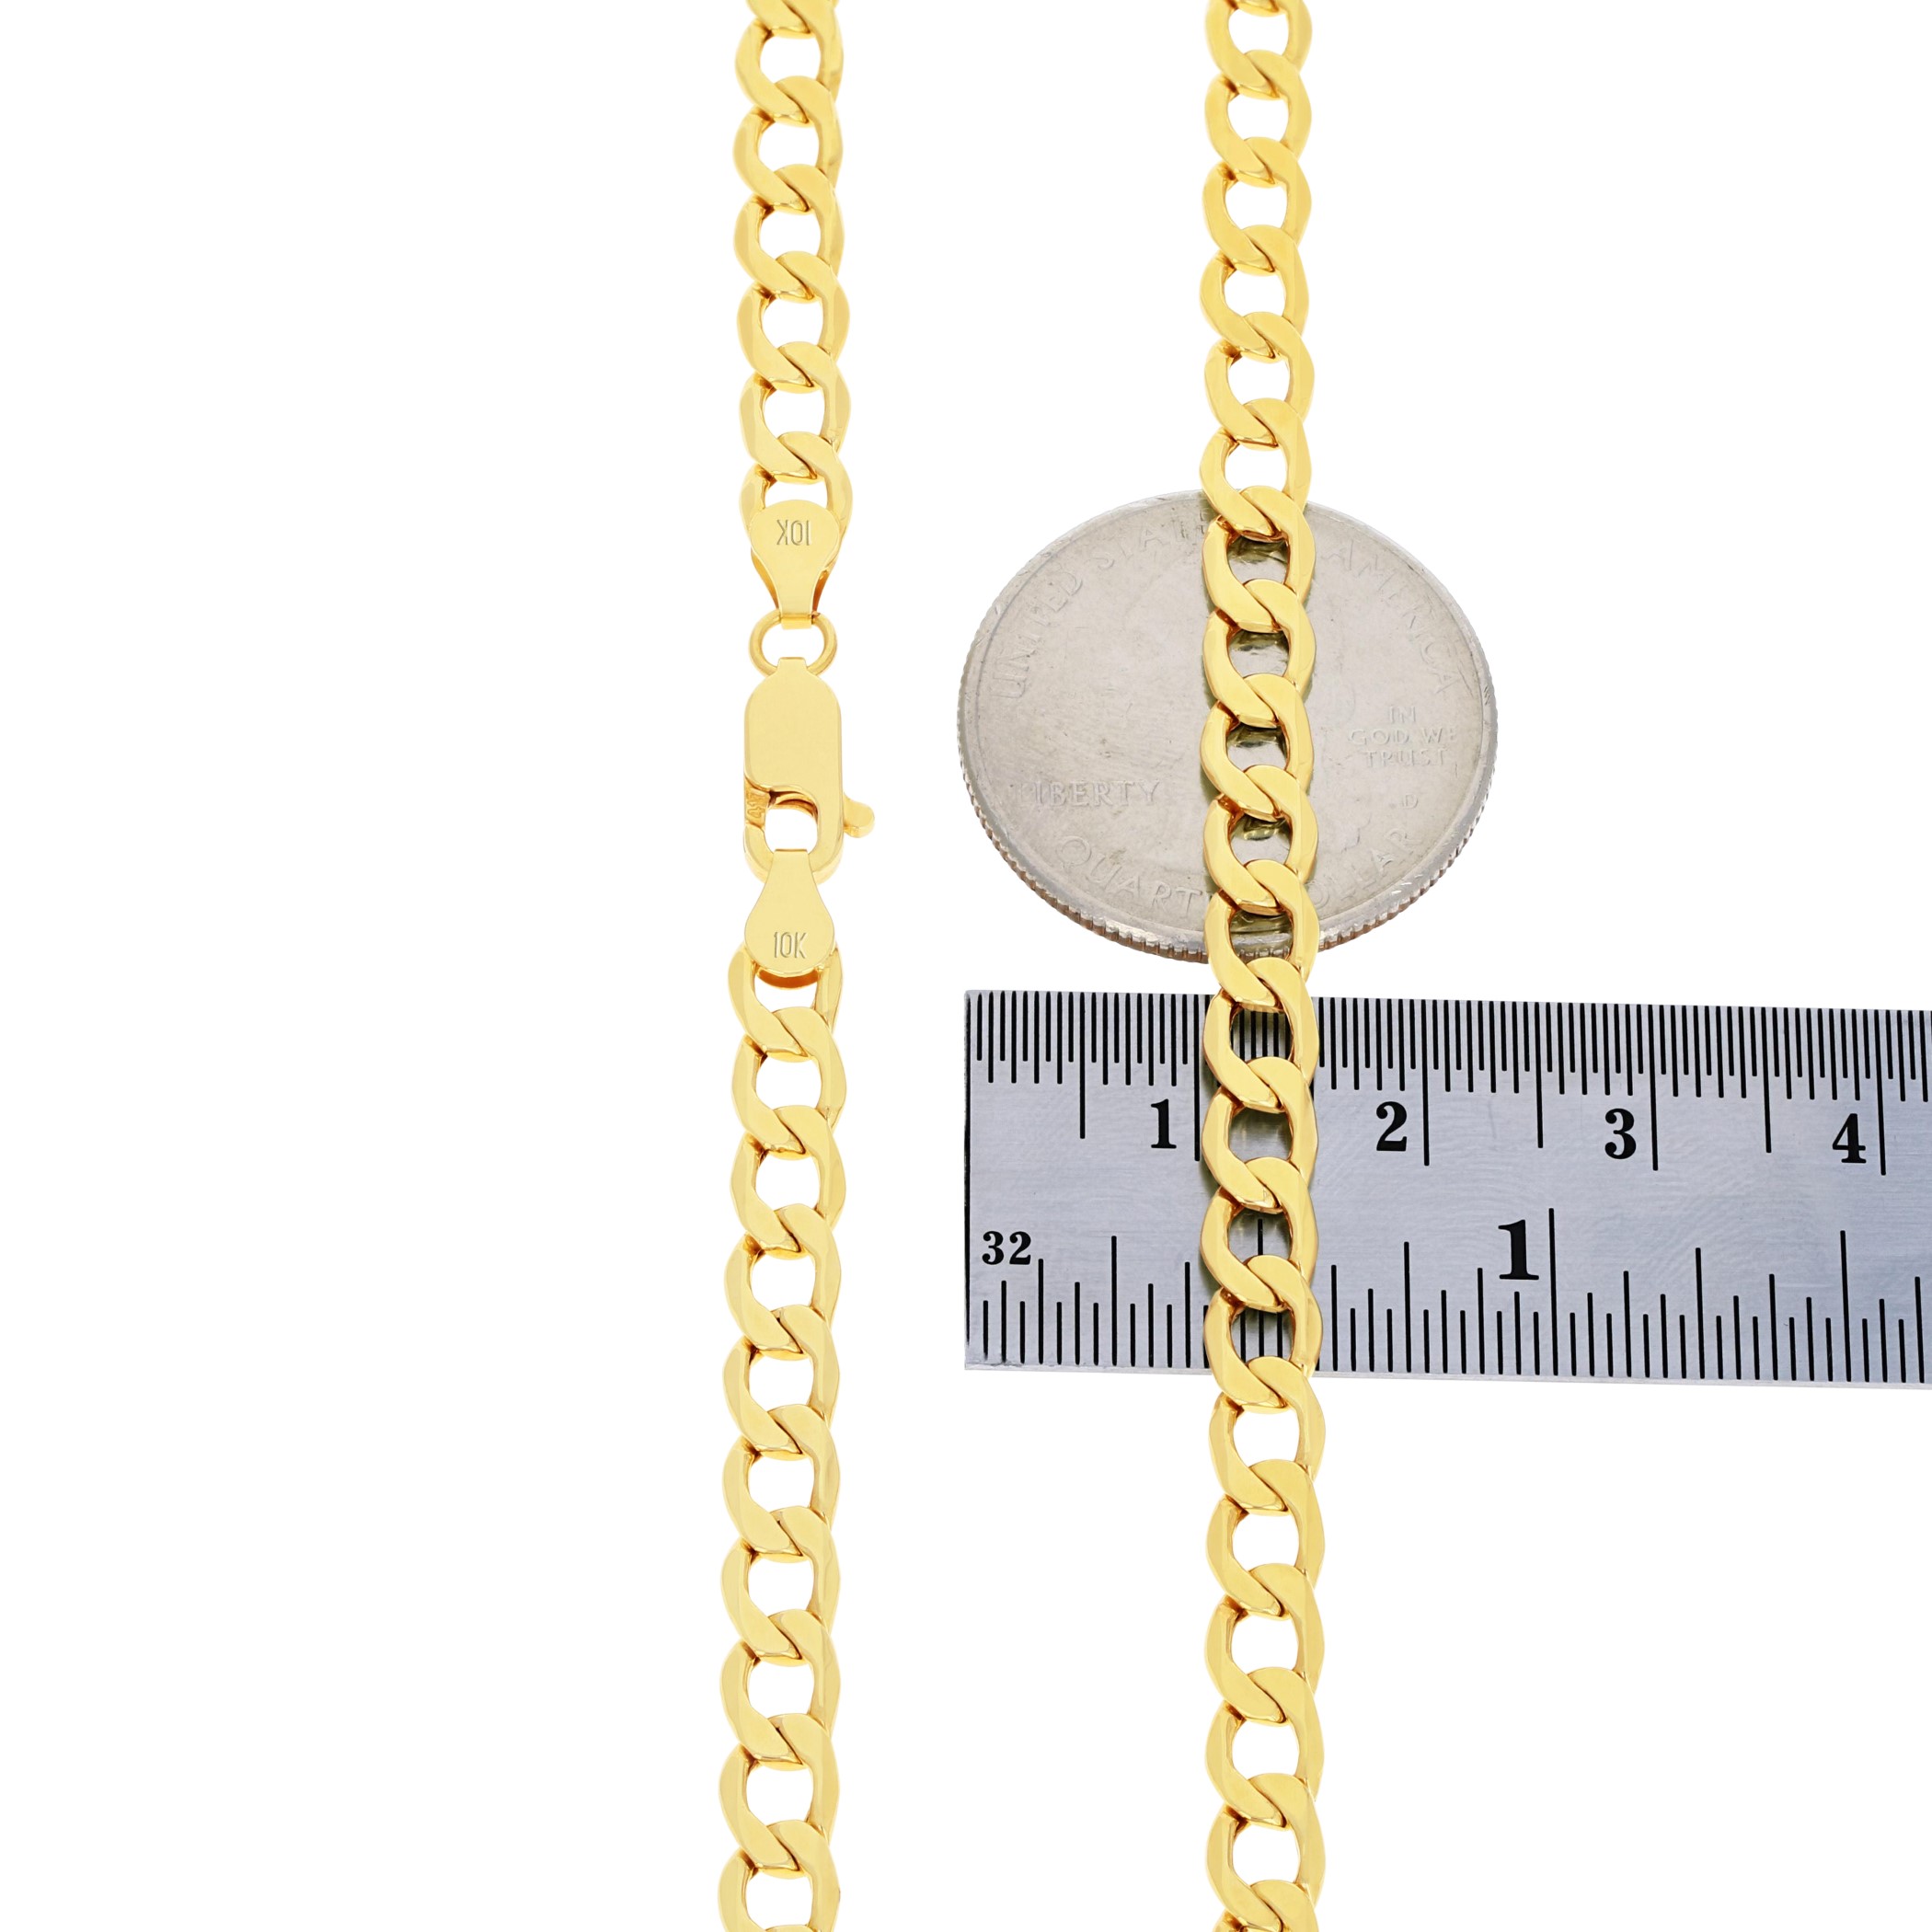 Nuragold 10k Yellow Gold 5.5mm Cuban Curb Link Chain Pendant Necklace, Mens Womens Jewelry 16" - 30" - image 5 of 11